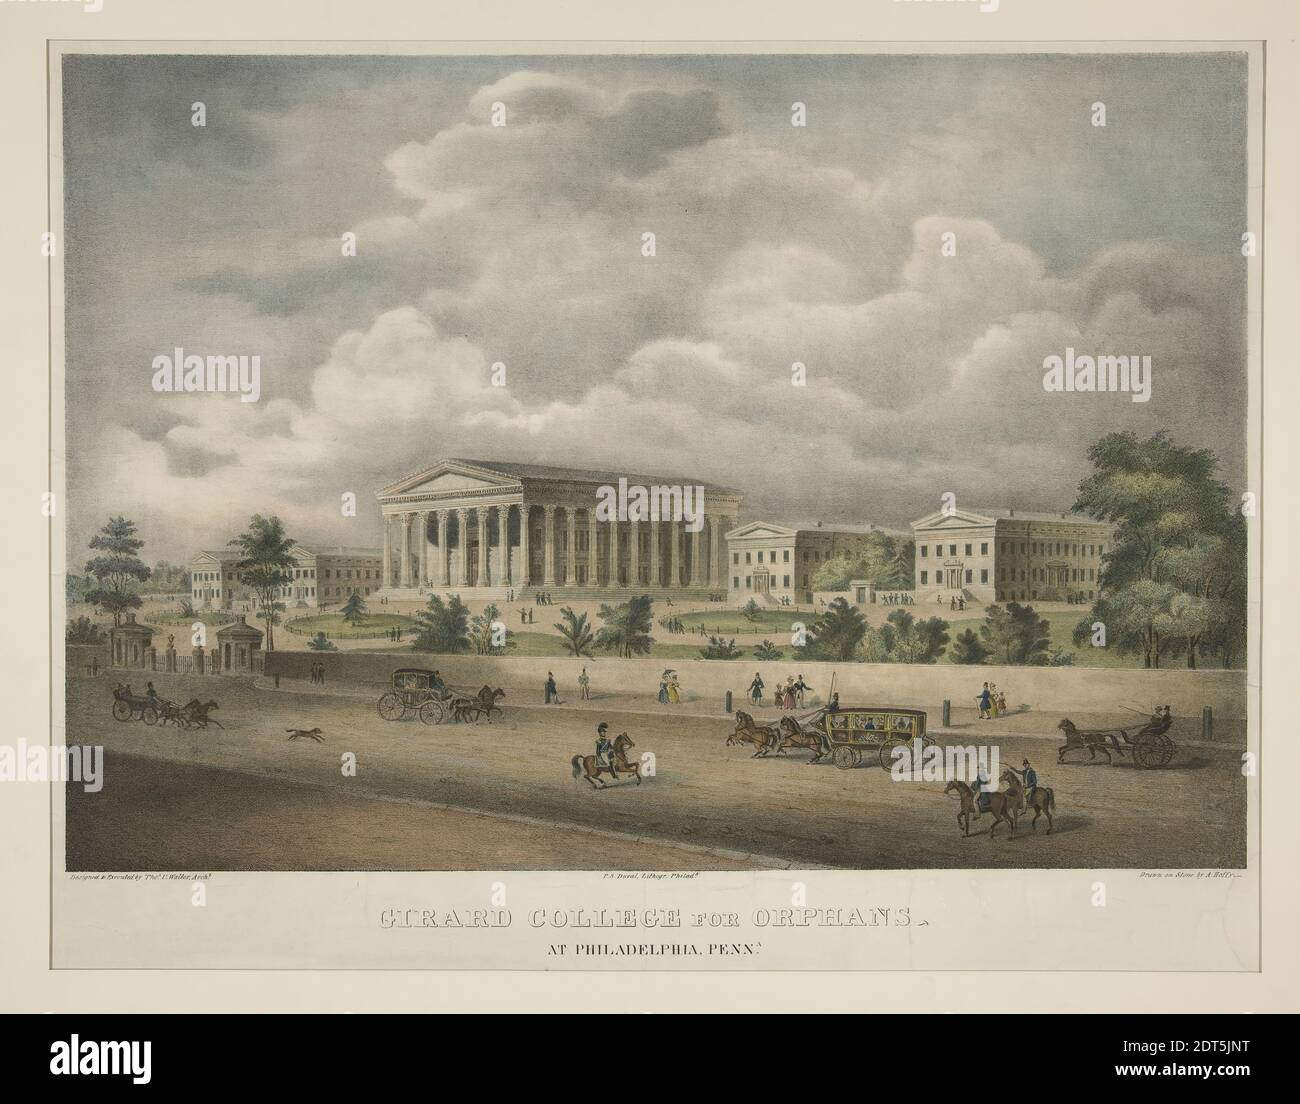 Artist: Alfred M. Hoffy, American, 1790–1860, After: Thomas Ustick Walter, American, 1804–1887, Girard College for Orphans - at Philidelphia, Penna., Lithograph, sheet: 43.5 × 55 cm (17 1/8 × 21 5/8 in.), Made in United States, American, 19th century, Works on Paper - Prints Stock Photo